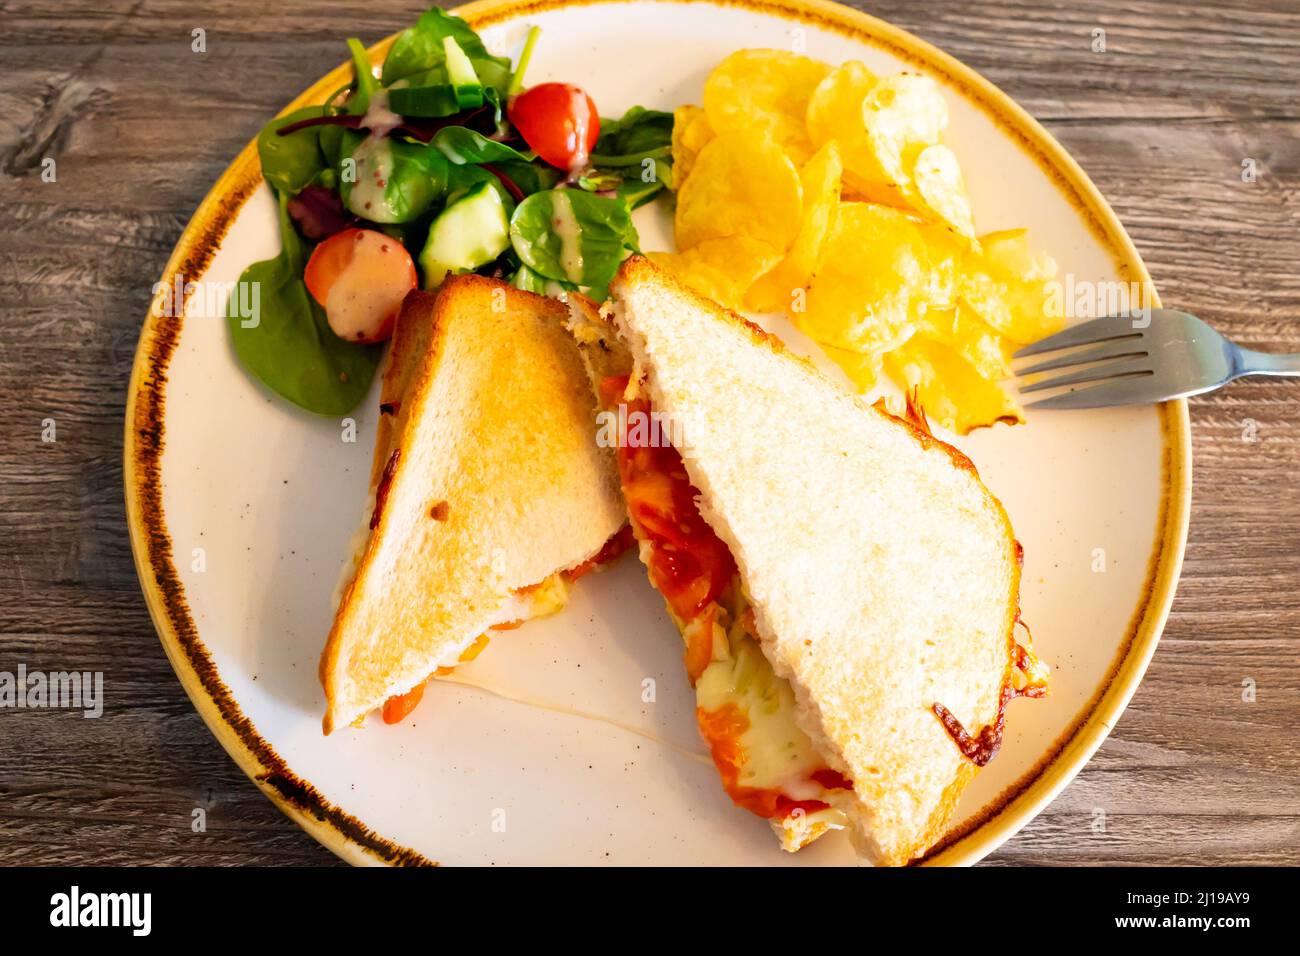 Lunch in a North Yorkshire country café  cheese and pepperoni  toasted sandwich on white bread with salad and potato crisps Stock Photo